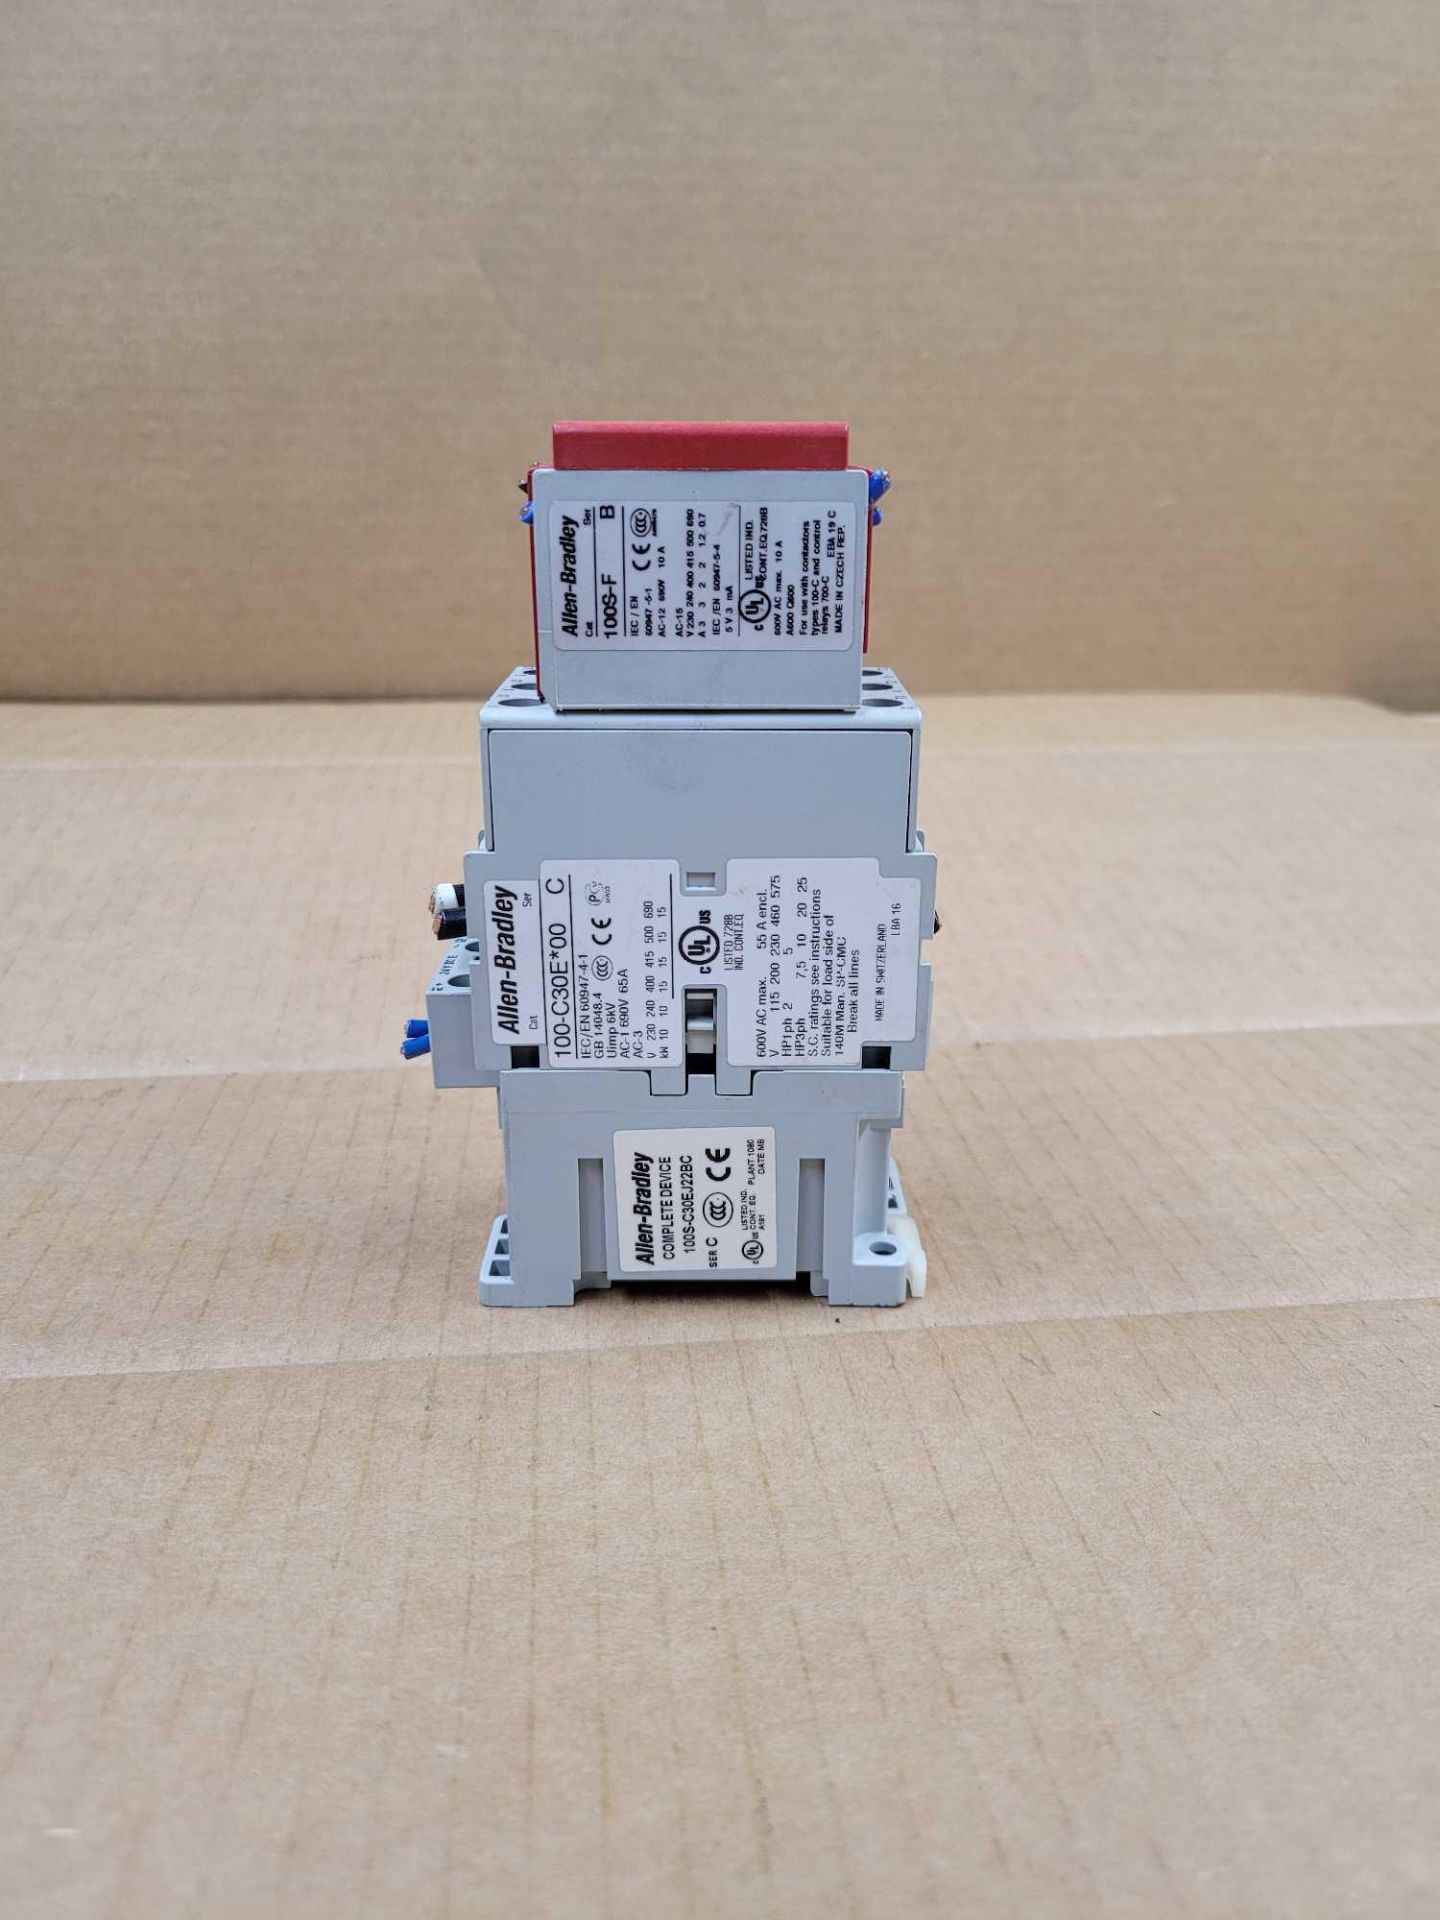 LOT OF 5 ALLEN BRADLEY 100S-C30EJ22BC / Guardmaster Safety Contactor  /  Lot Weight: 6.0 lbs - Image 6 of 9